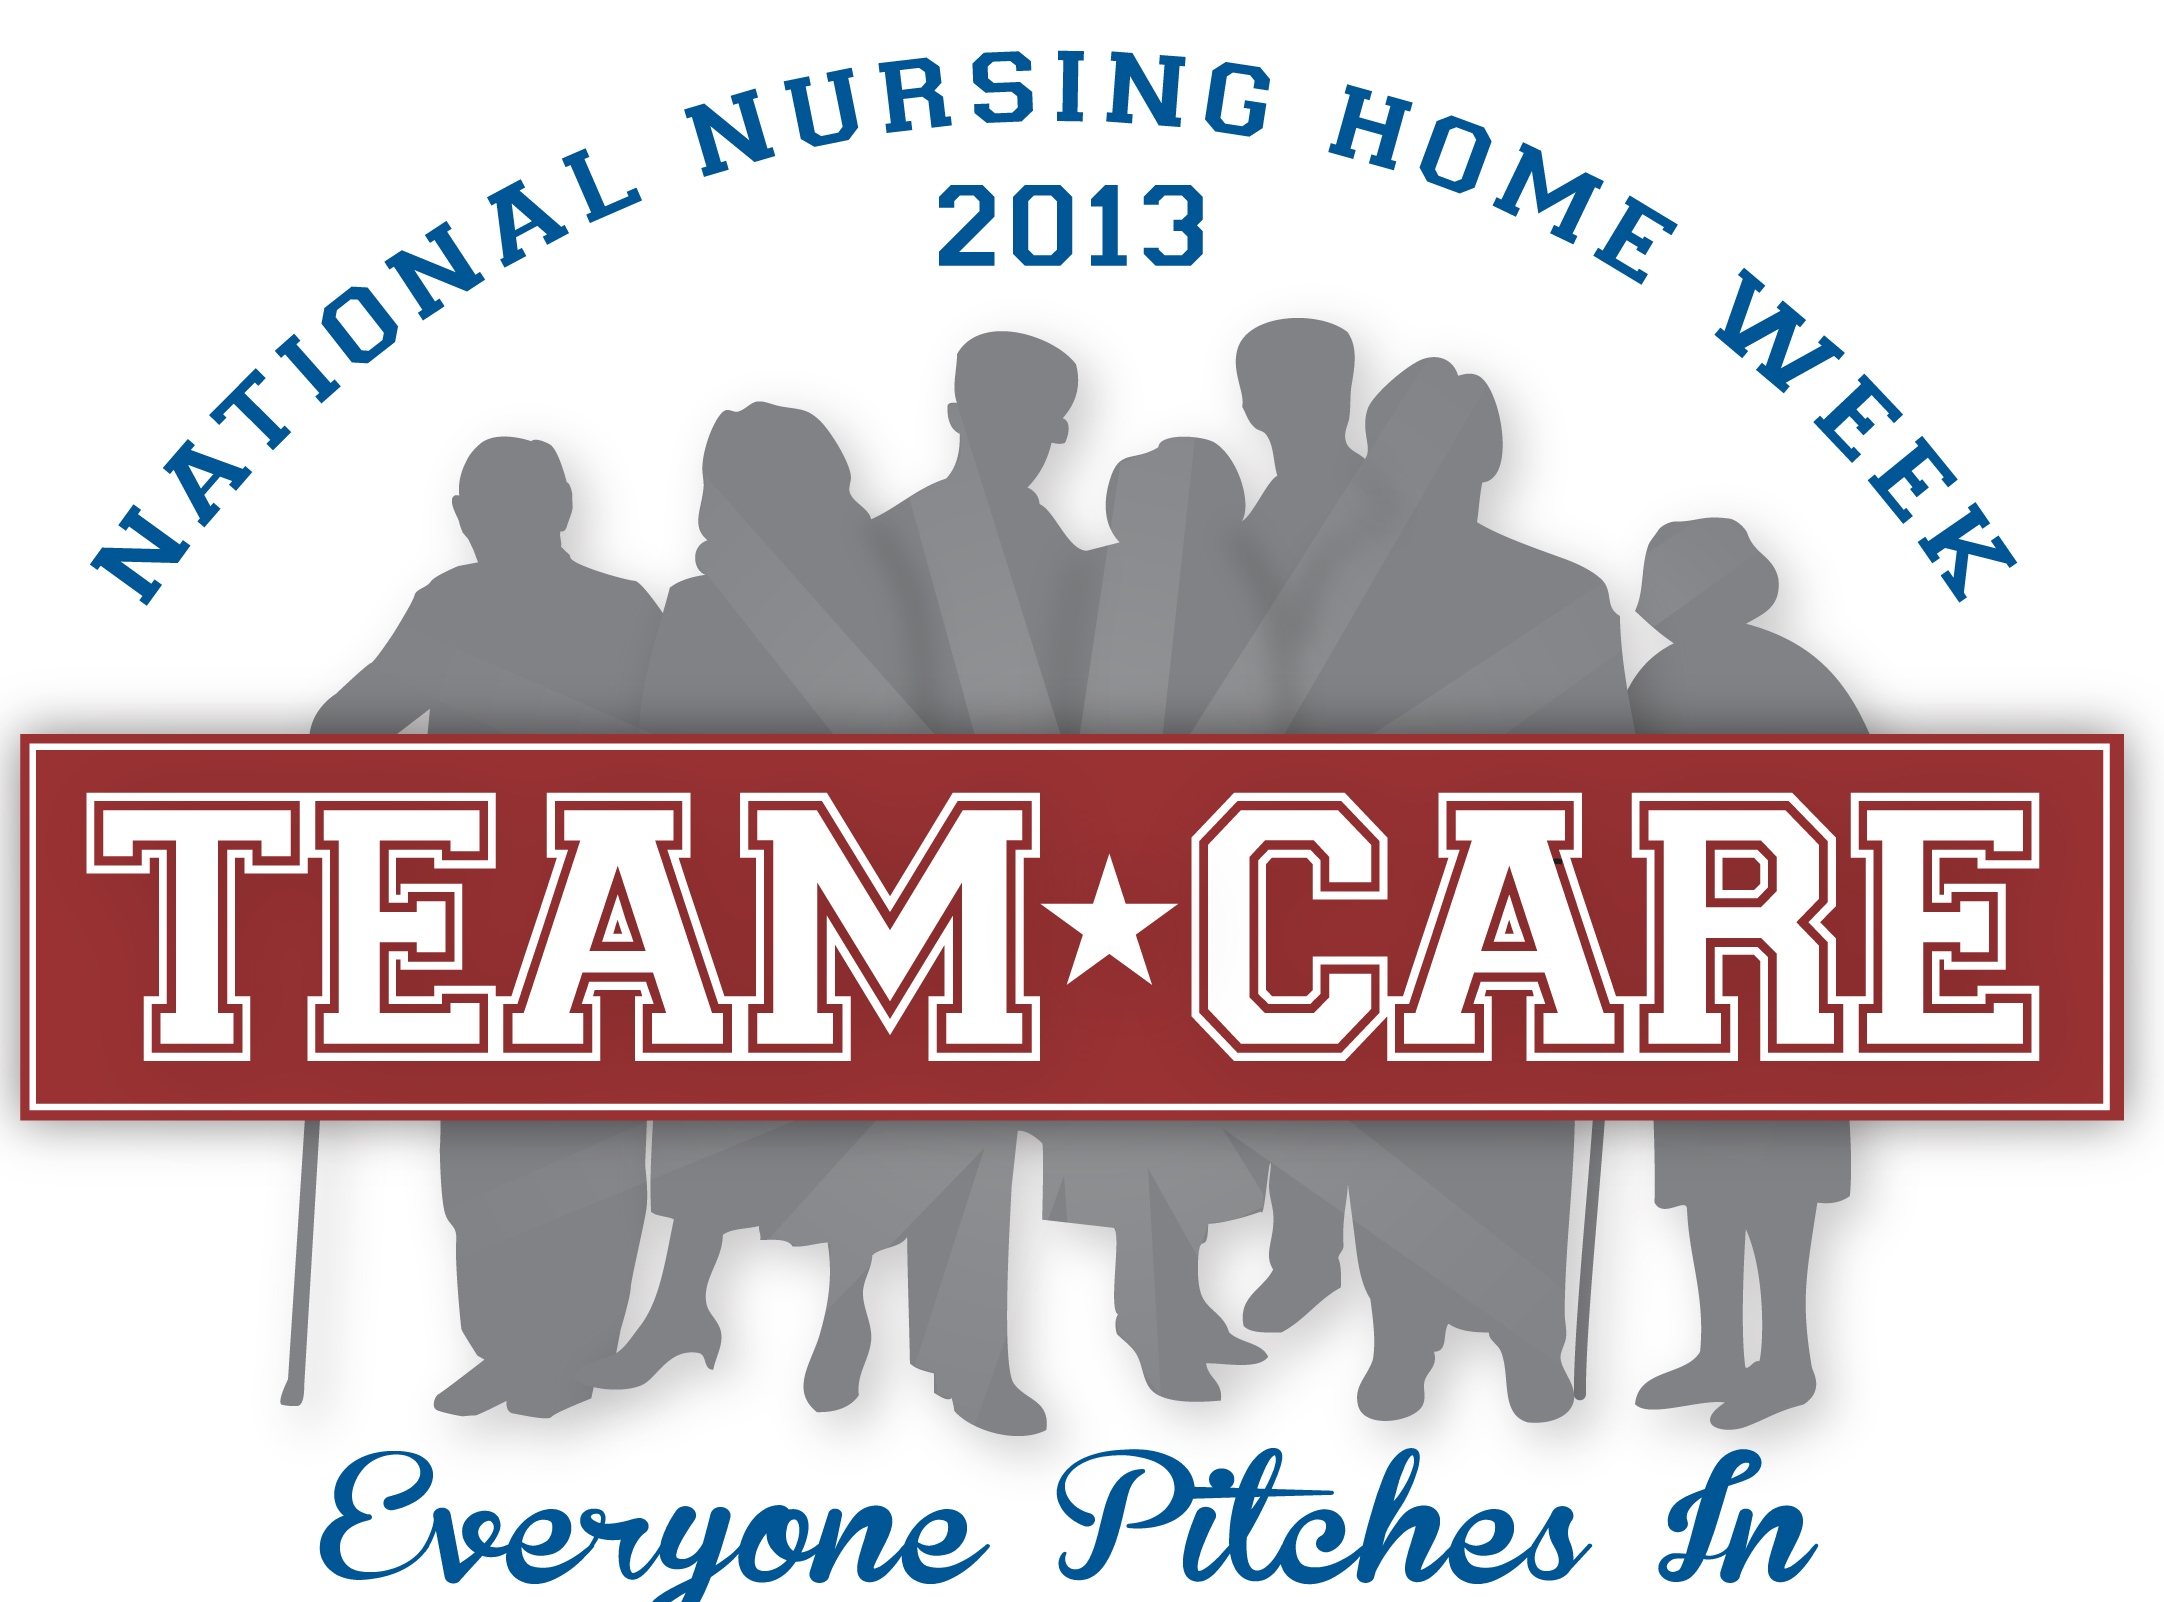 Happy Nursing Home Week To All Of Our Residents And Employees